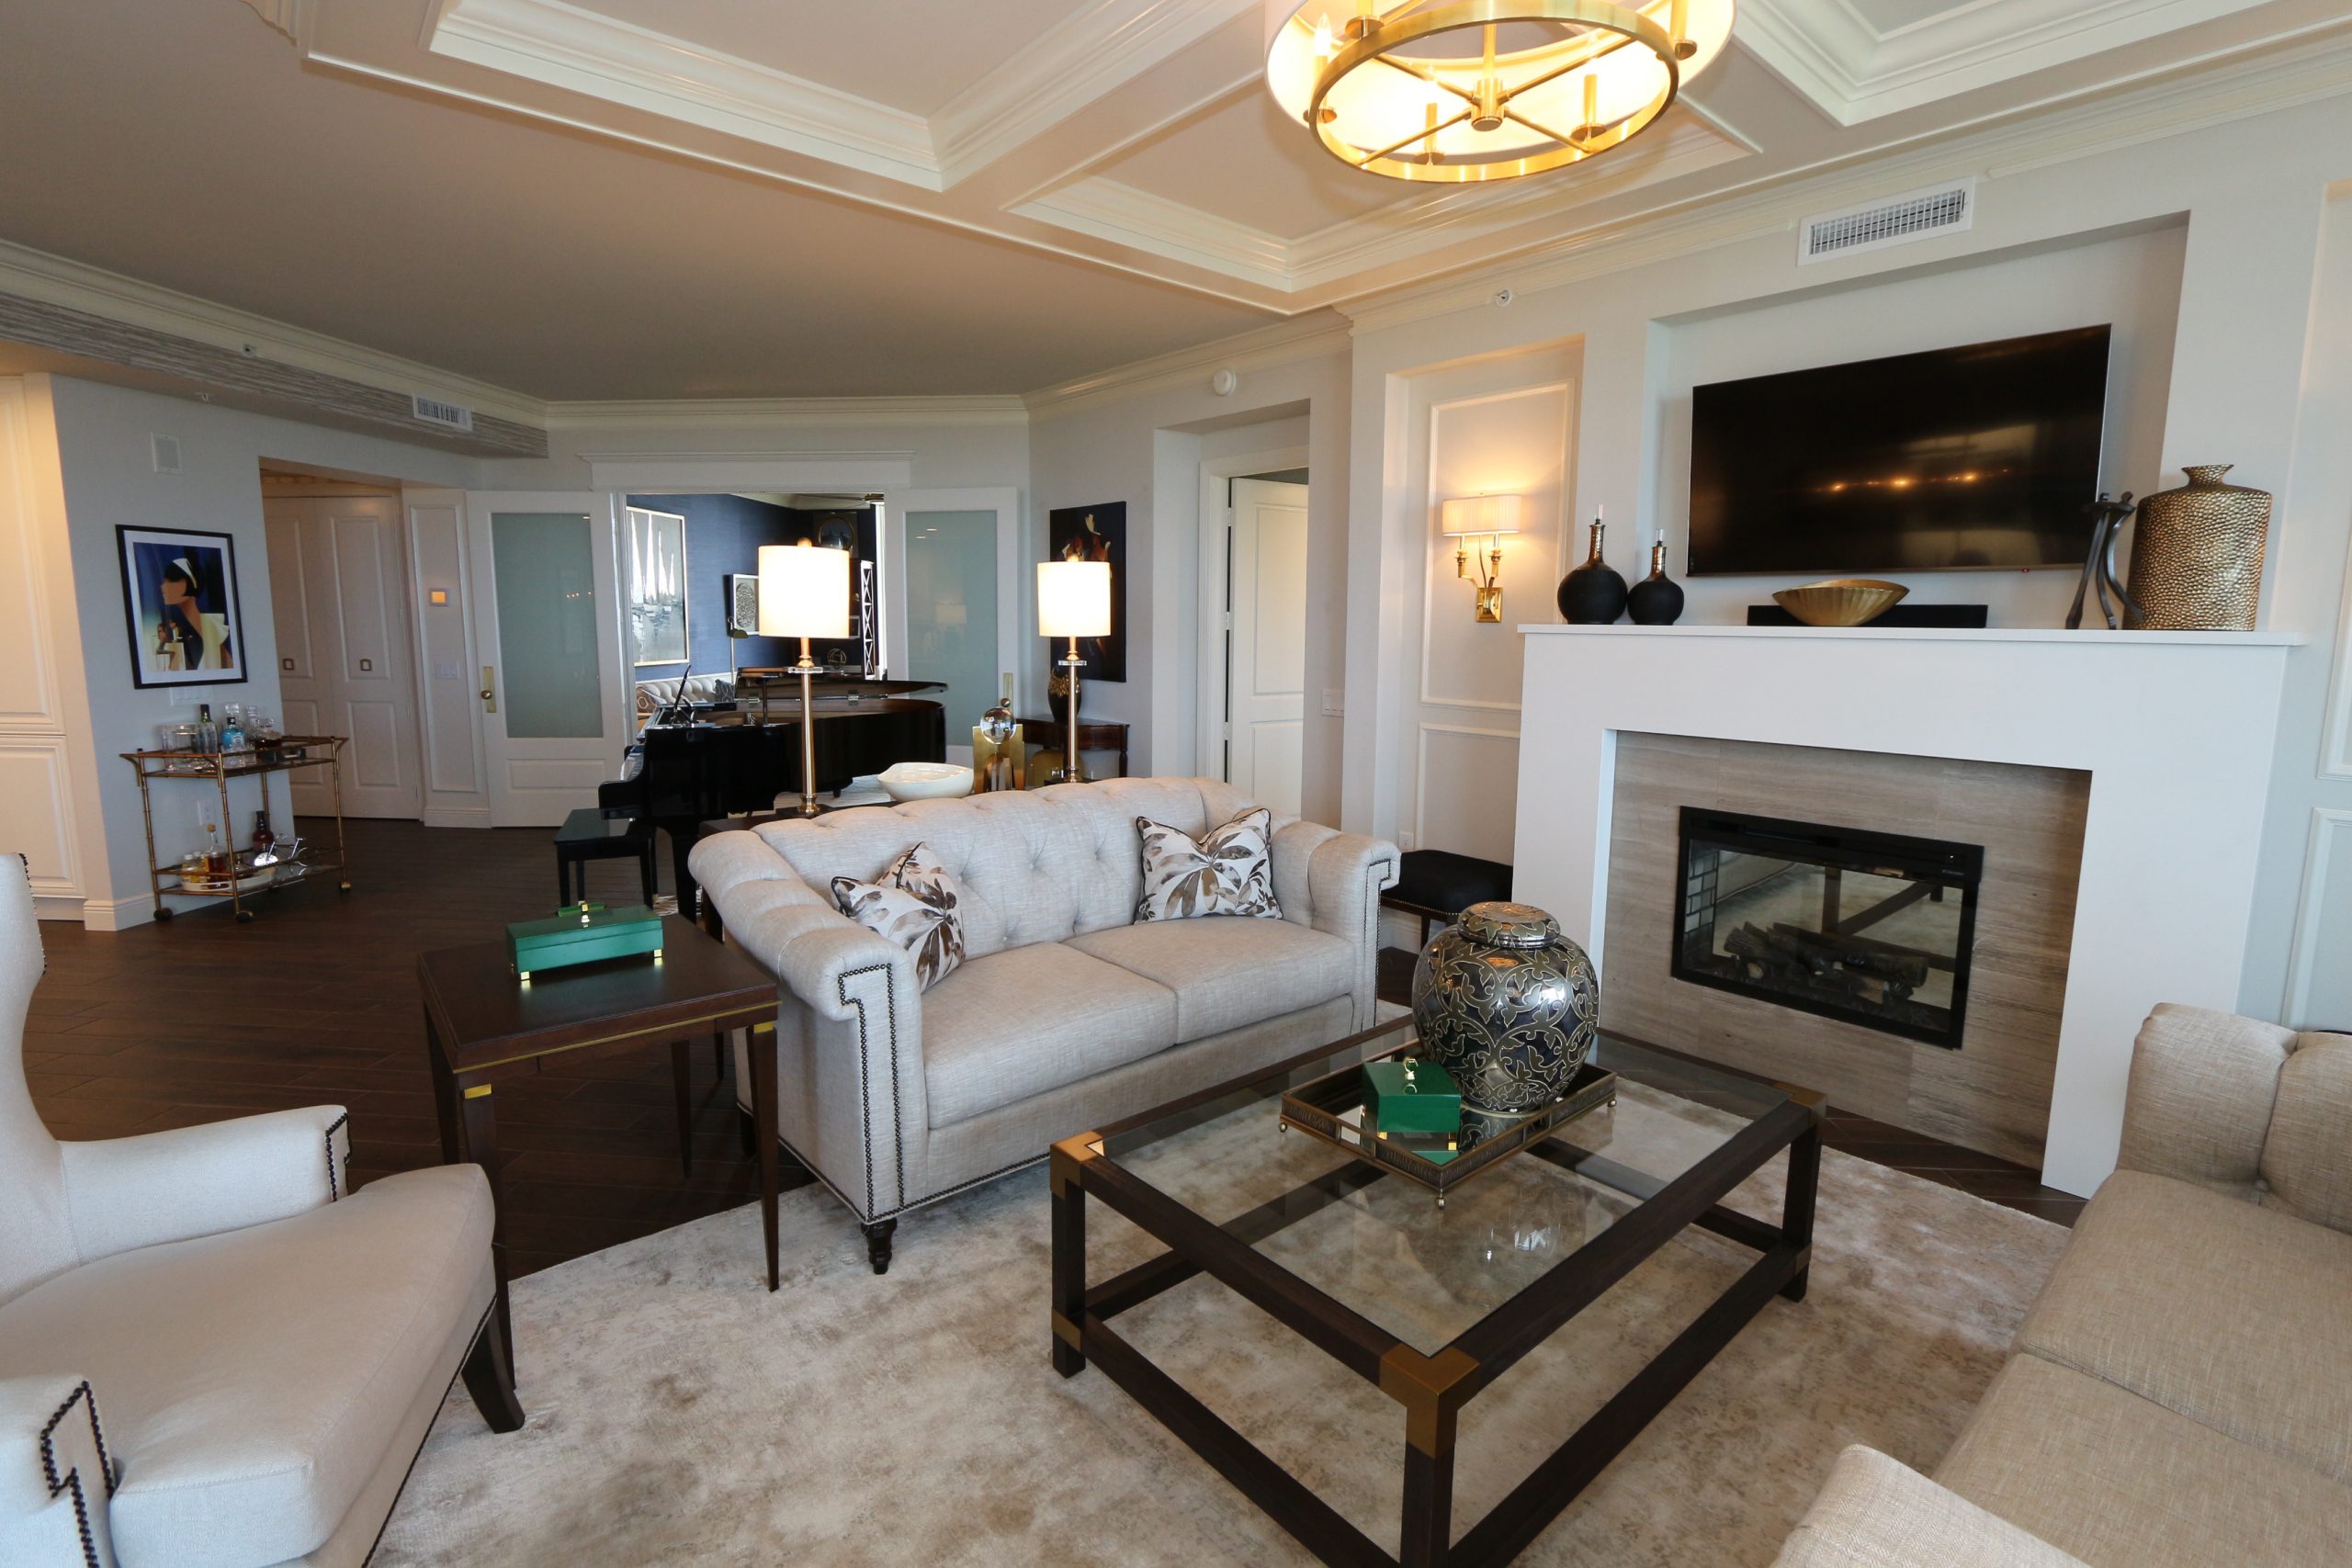 Luxury Living Room Designed by GailGray Home in Florida